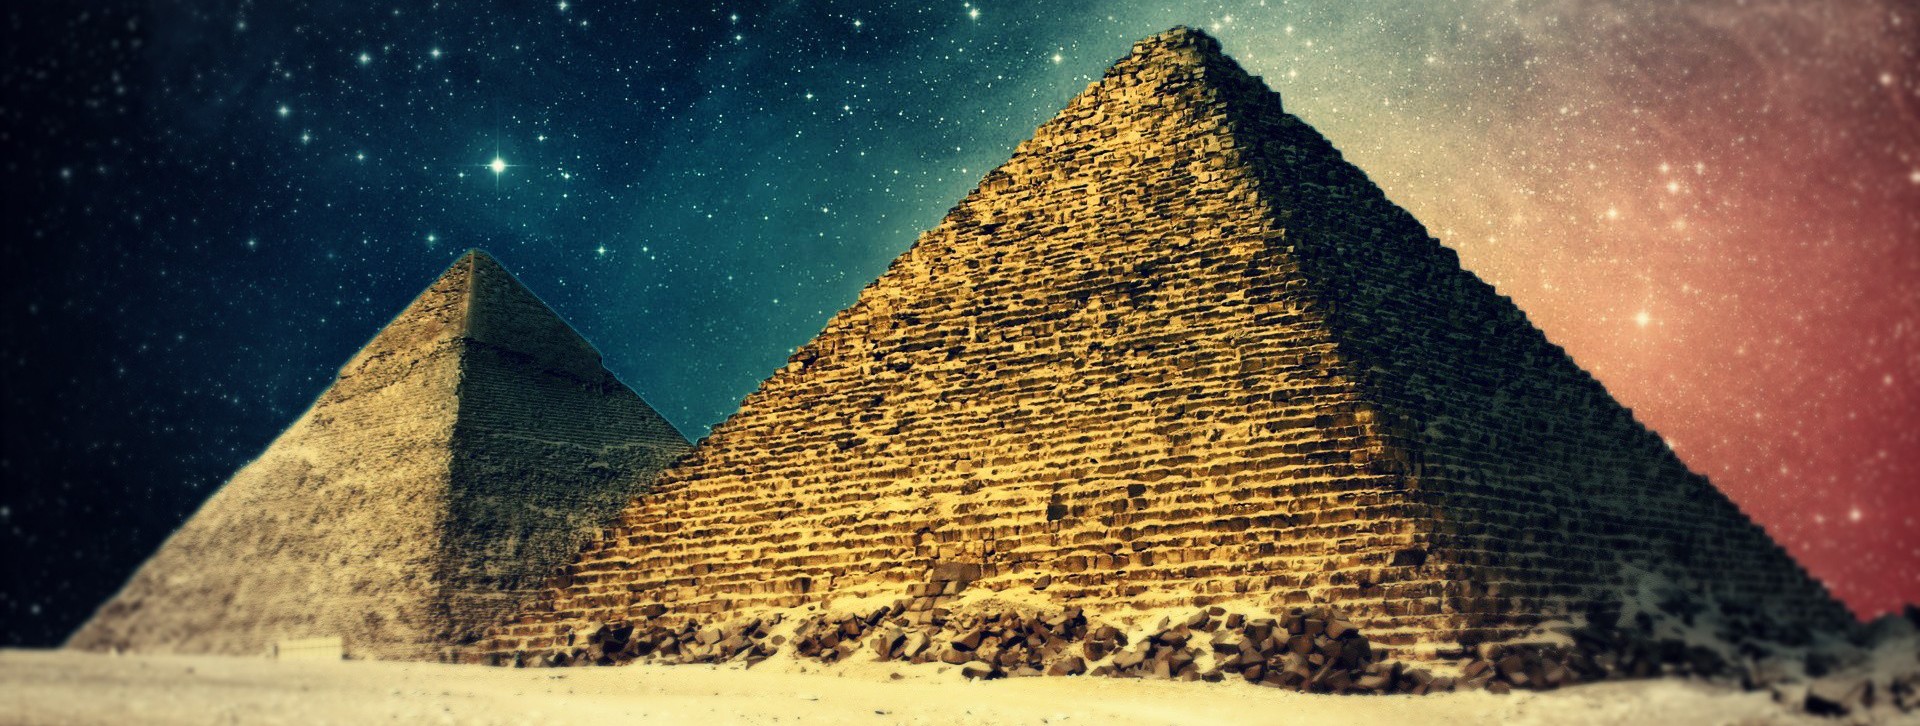 Architects And Scientists Observed Thermal Anomalies or Change In Temperature In Pyramids Of Egypt